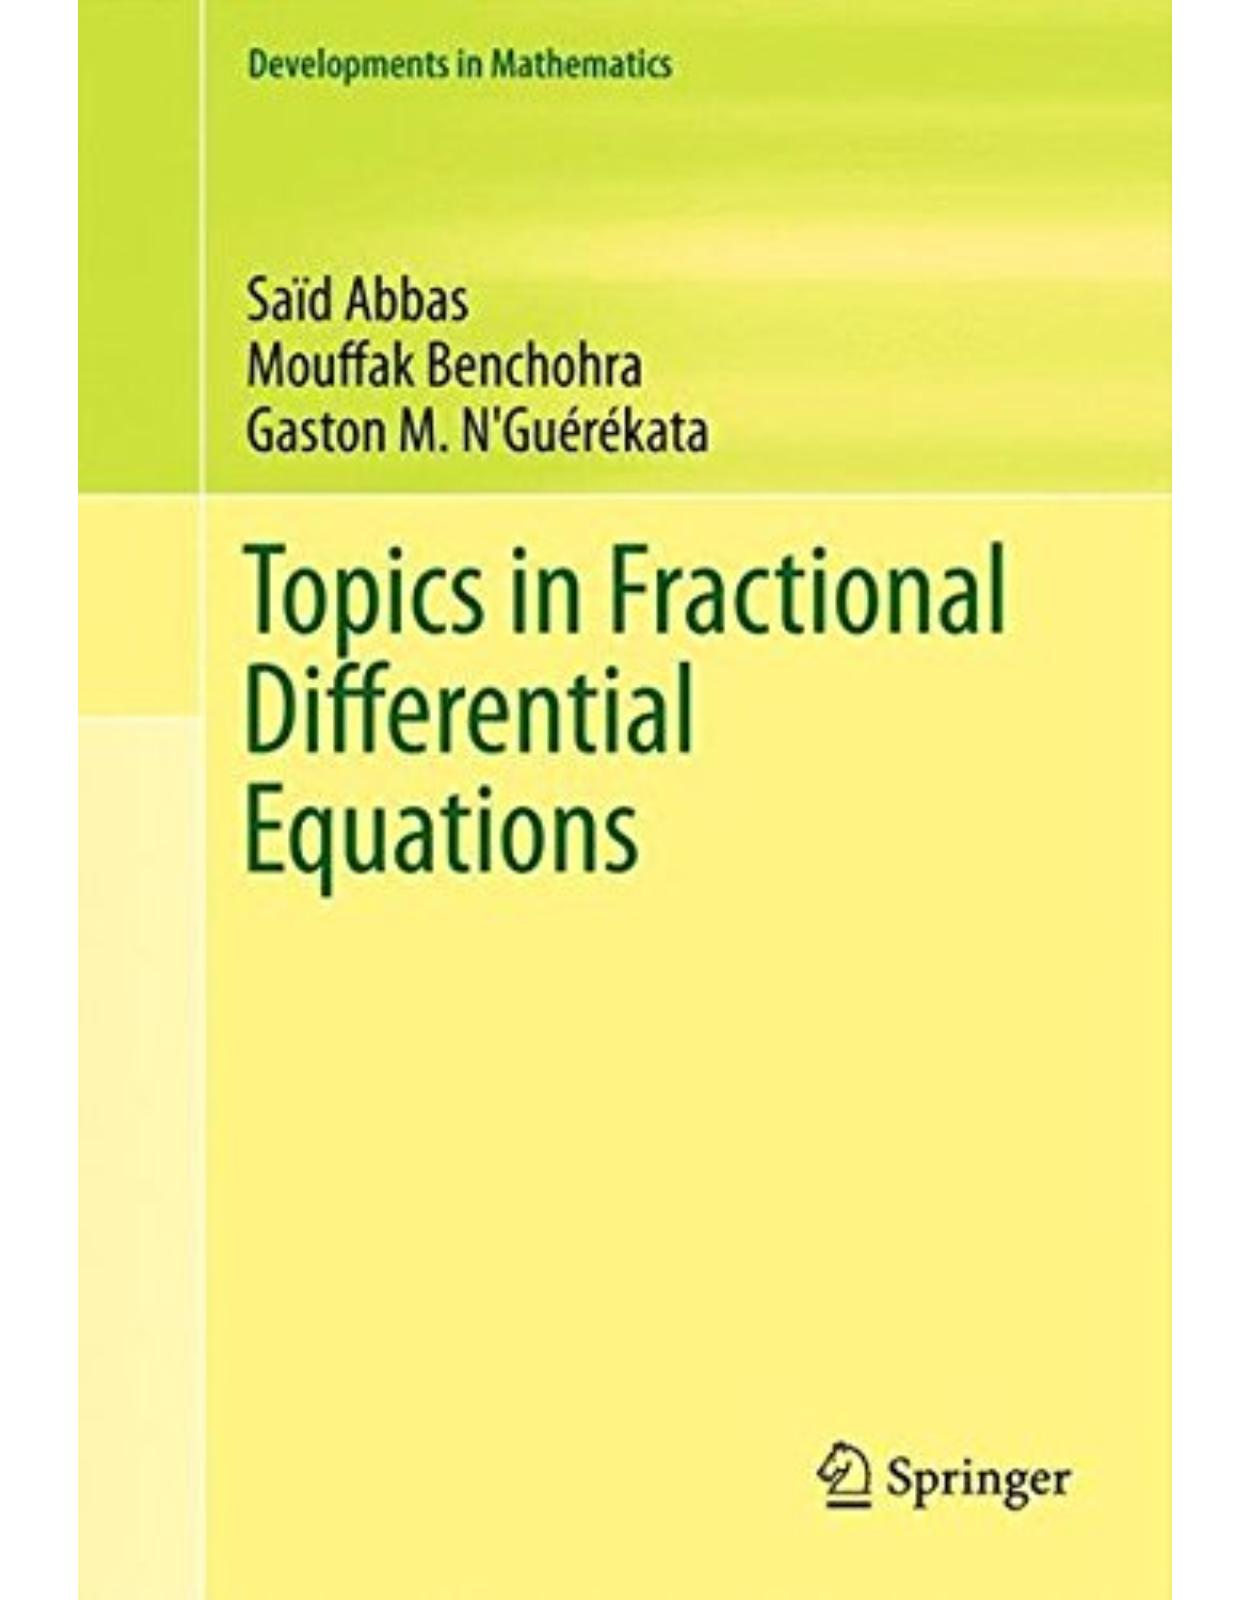 Topics in Fractional Differential Equations